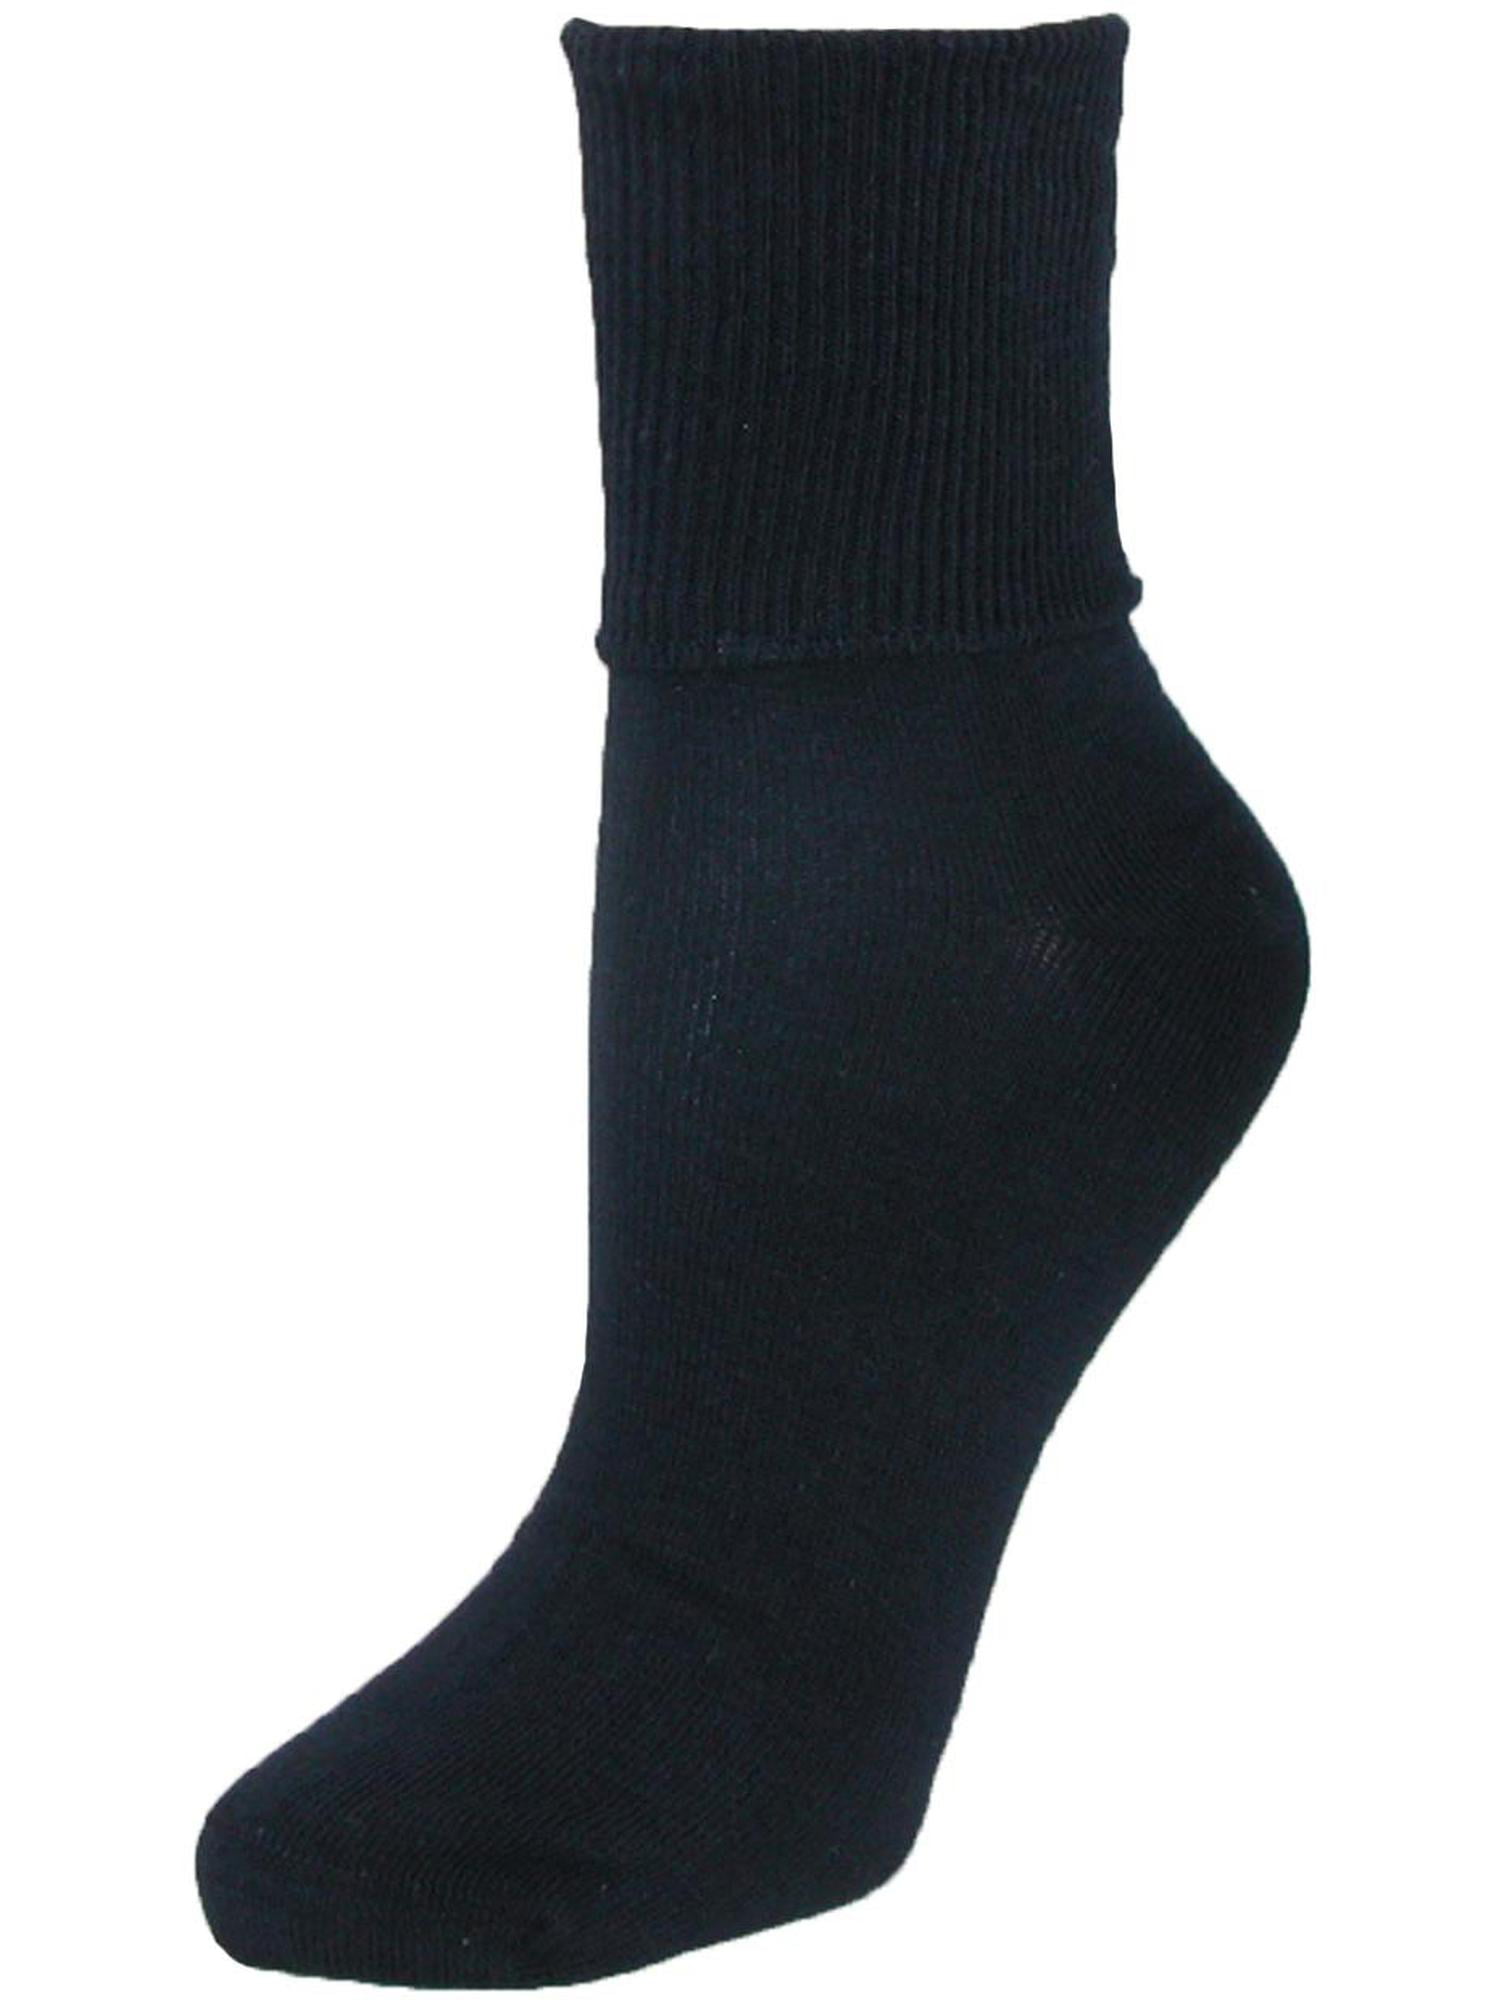 Details about   PLUSH terry turn cuff action sport socks 45% creslan vtg NWT girls size 6-8.5 